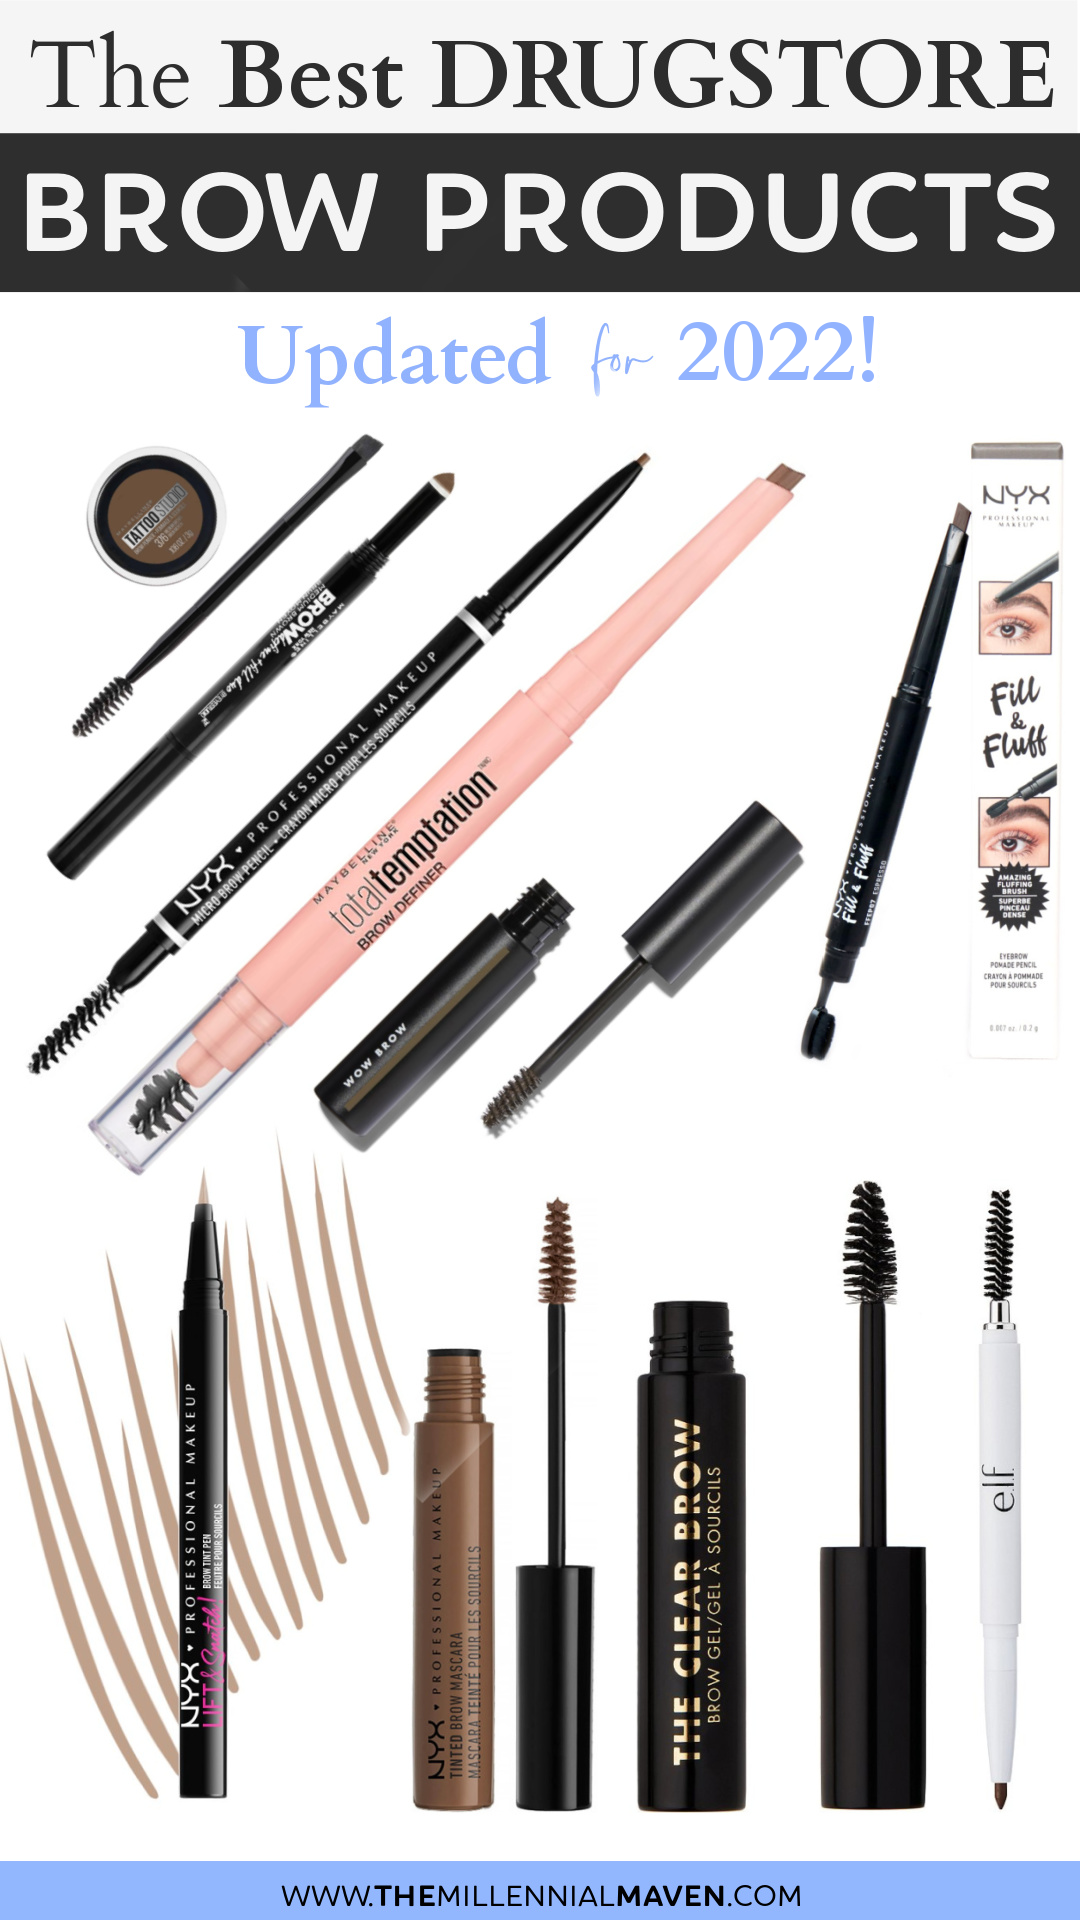 Top 10 Best Drugstore Eyebrow Products in 2022! | Best Drugstore Brow Products